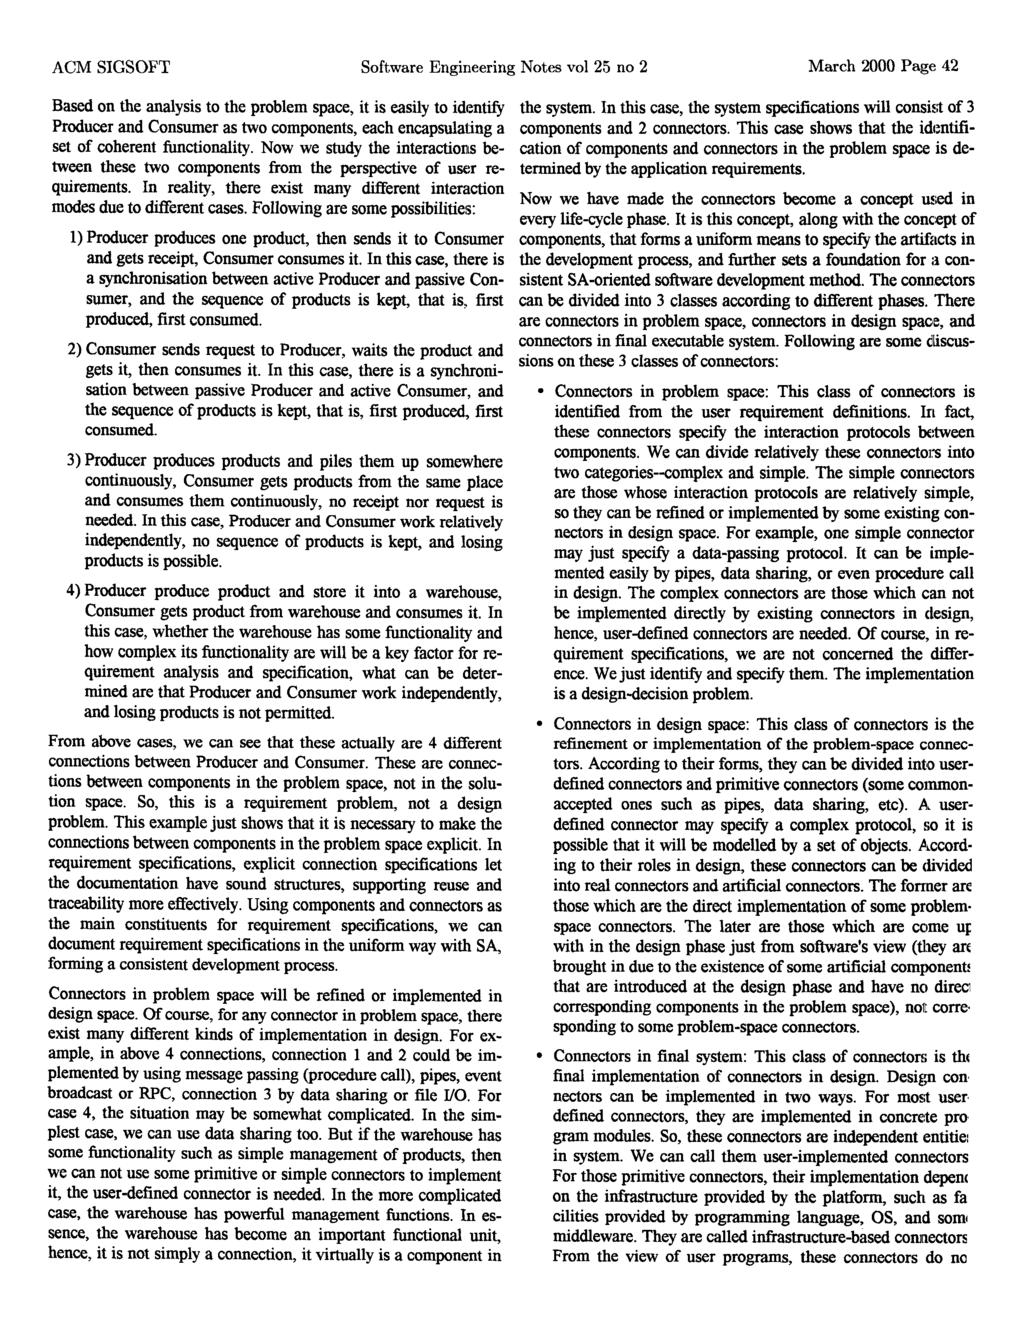 ACM SIGSOFT Software Engineering Notes vol 25 no 2 March 2000 Page 42 Based on the analysis to the problem space, it is easily to identify Producer and Consumer as two components, each encapsulating